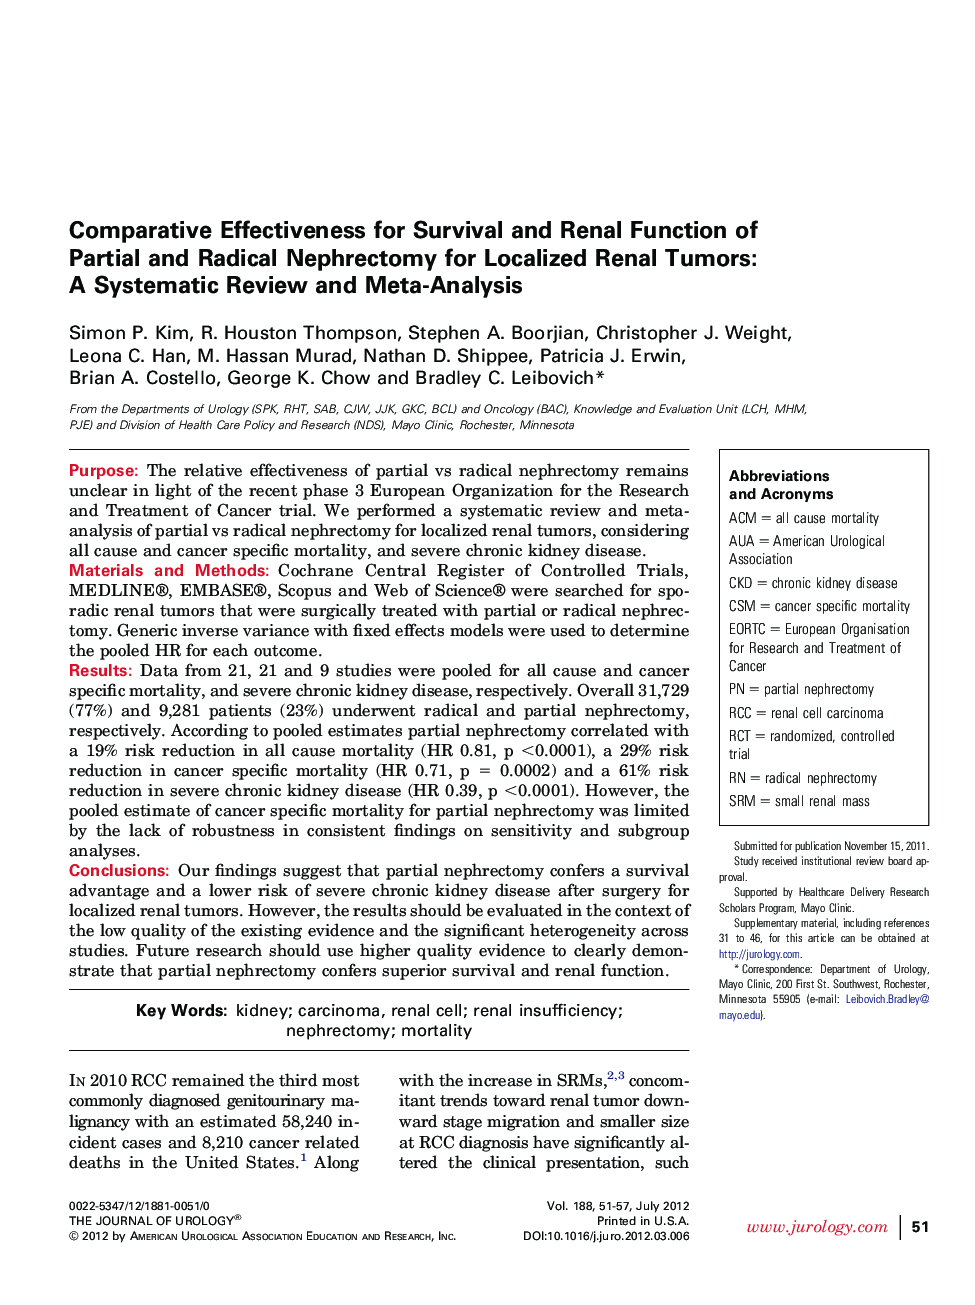 Comparative Effectiveness for Survival and Renal Function of Partial and Radical Nephrectomy for Localized Renal Tumors: A Systematic Review and Meta-Analysis 